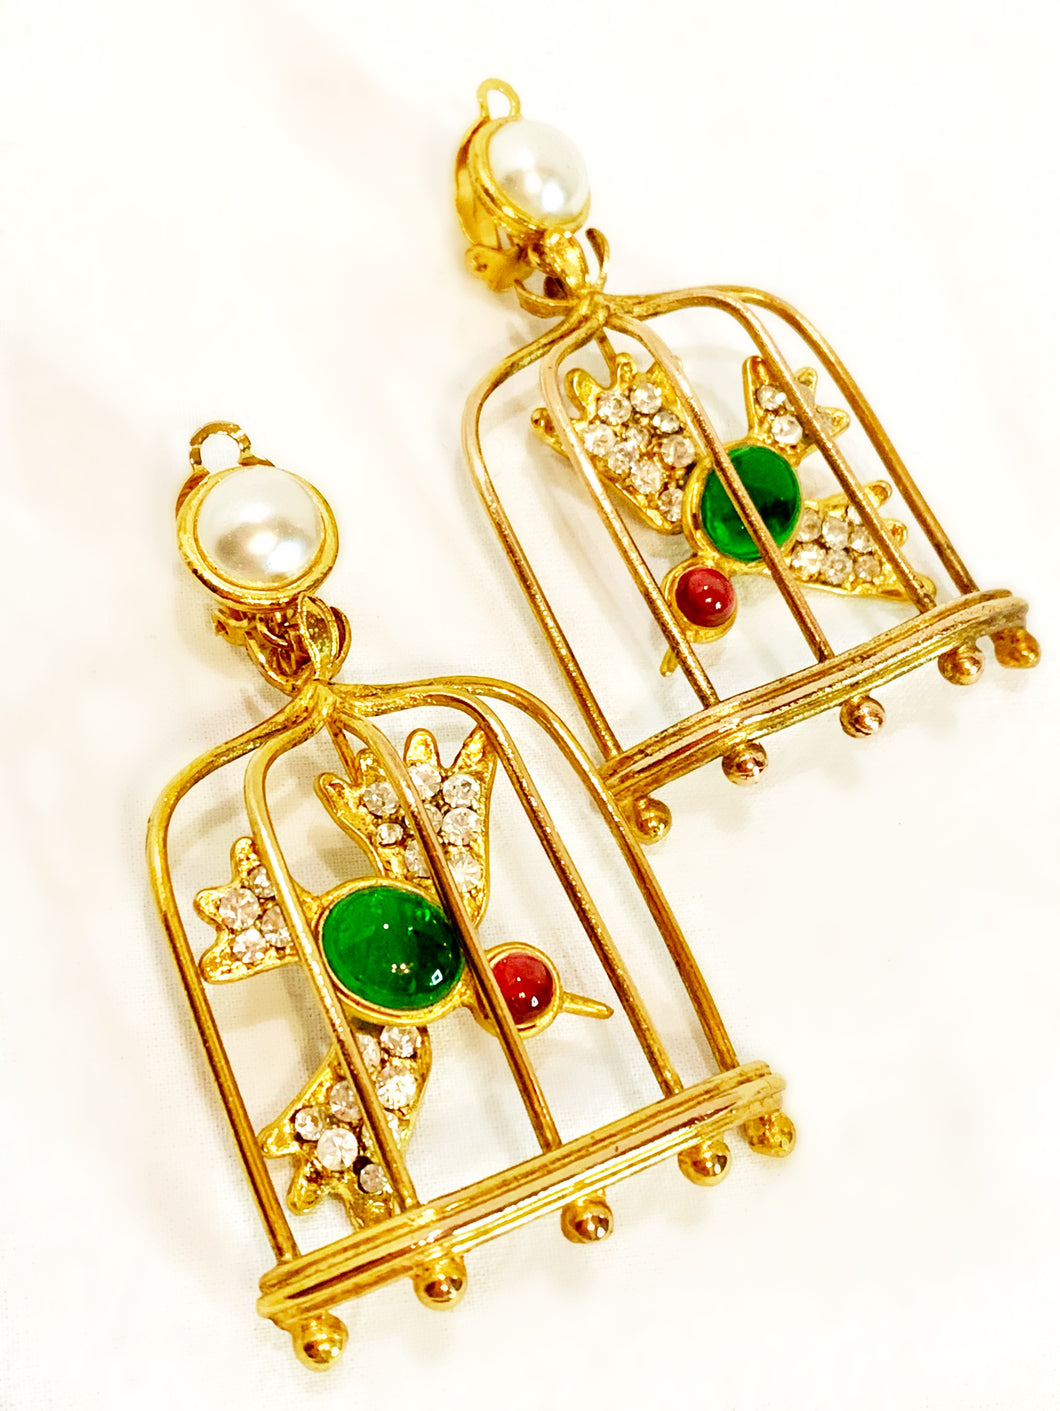 CHANEL ICONIC BIRD CAGE GRIPOIX GLASS BIRDS PEARL EARRINGS